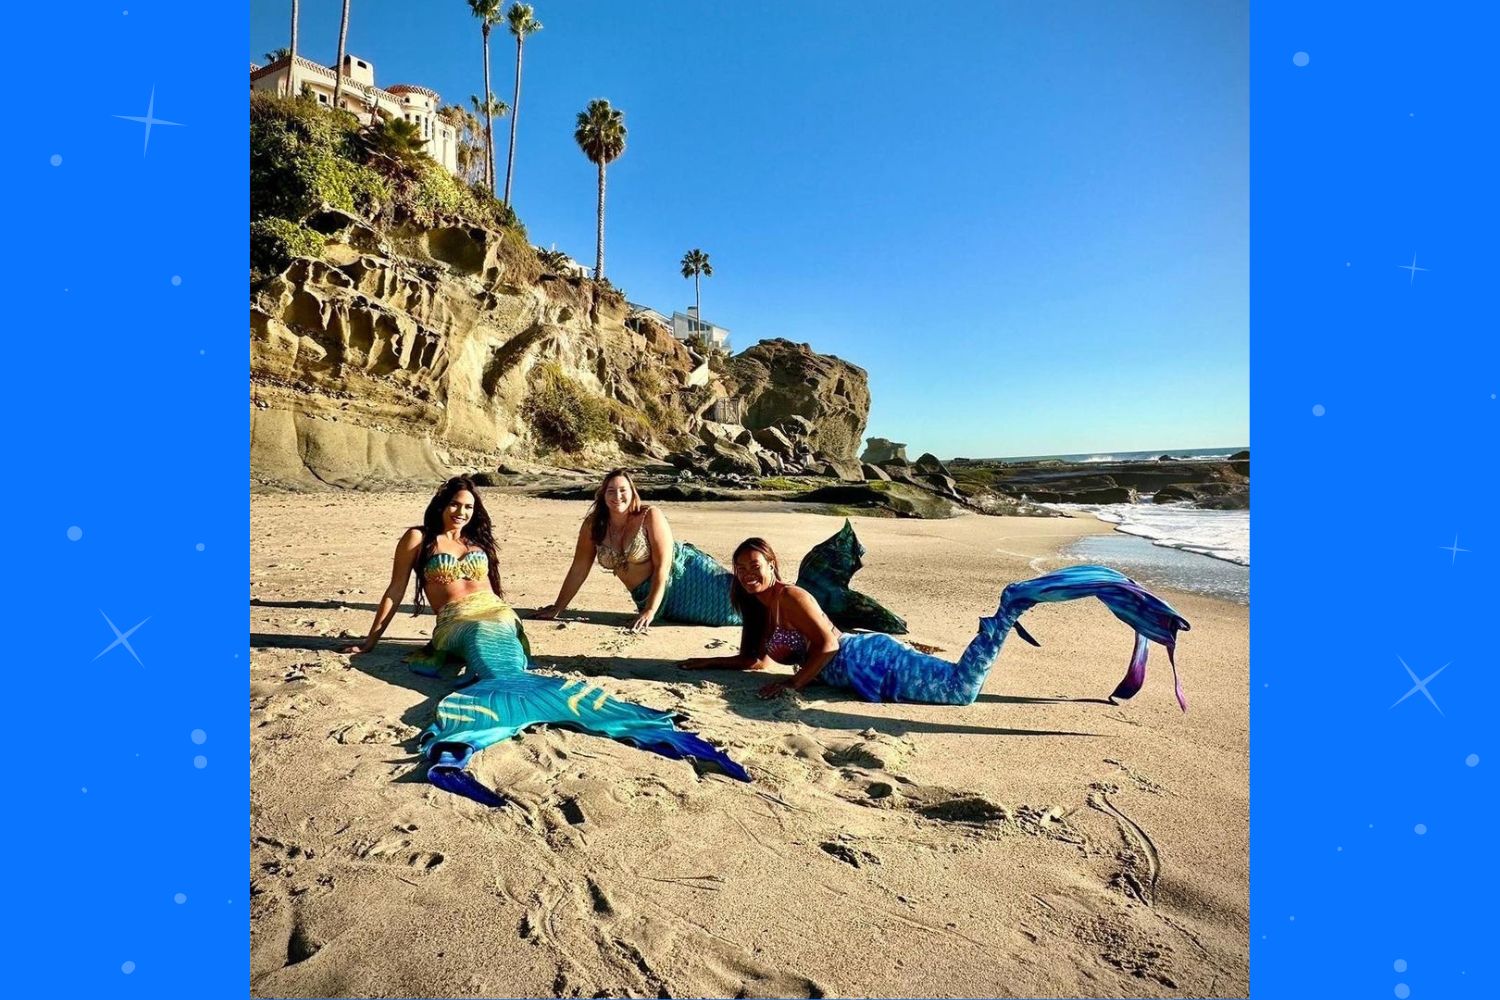 Three mermaids save scuba diver's life after he loses consciousness off coast of California